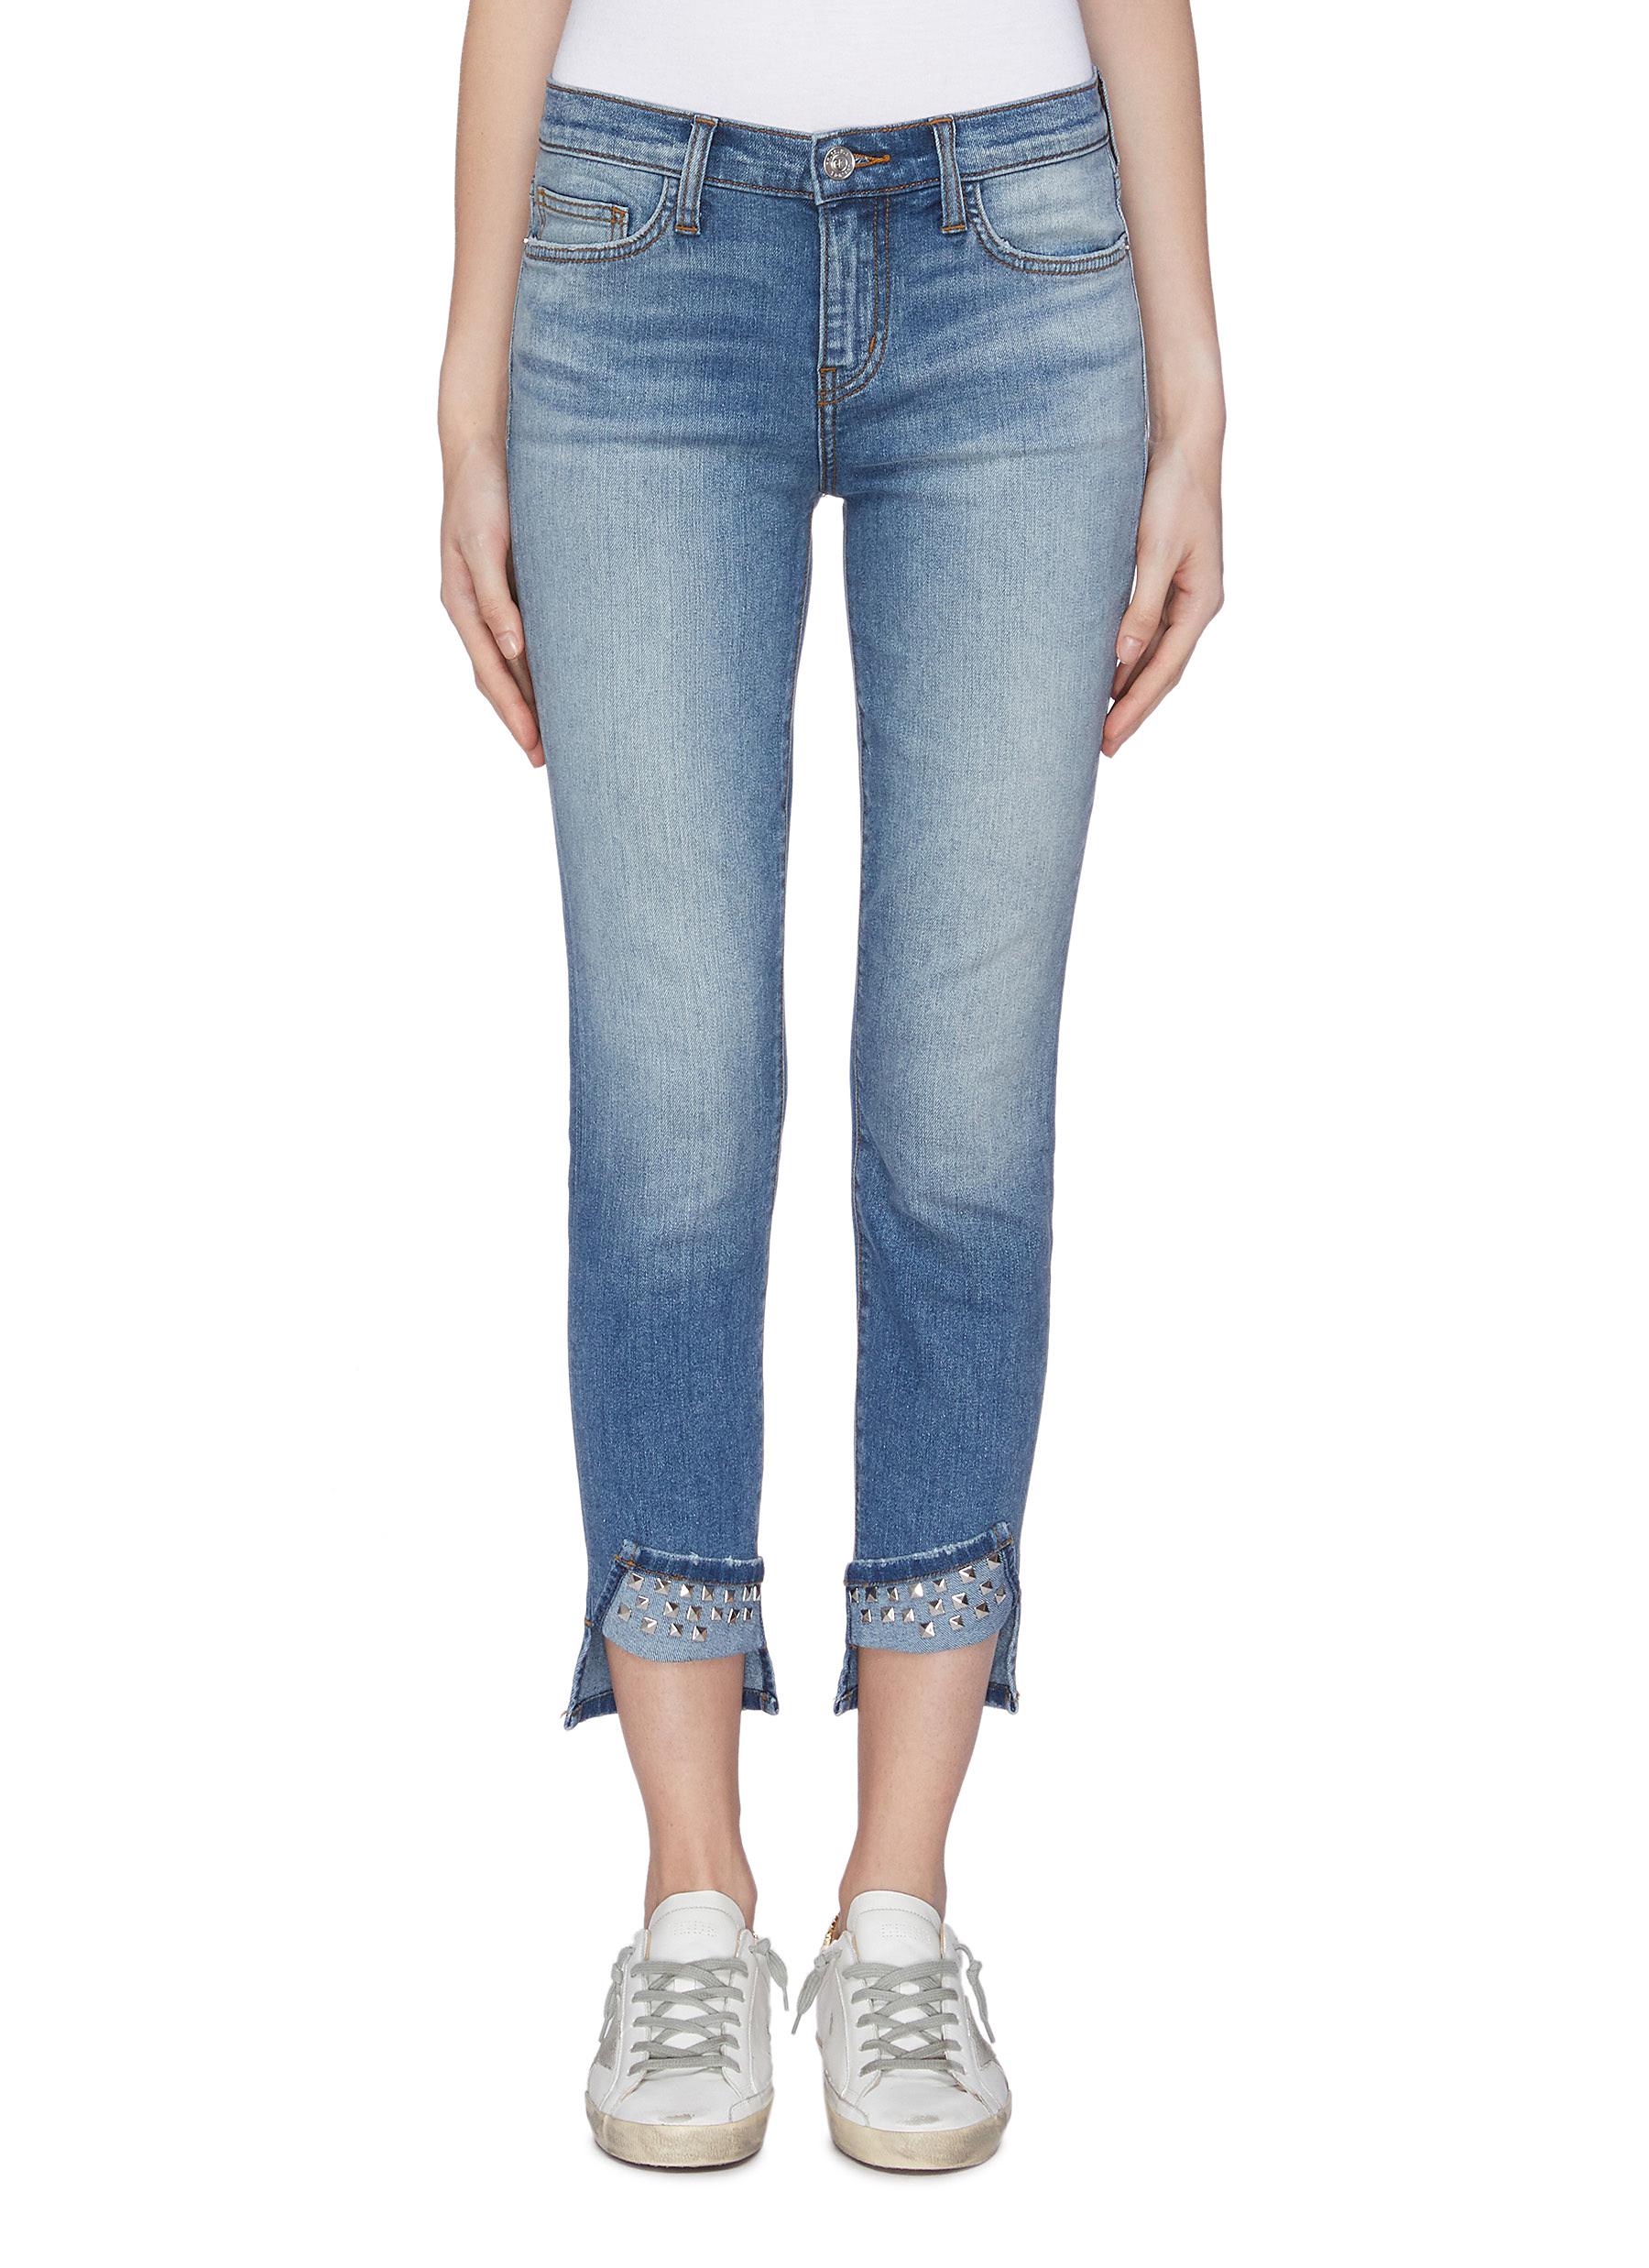 The Turnt Ankle Skinny Stiletto split studded cuff jeans by Current/Elliott